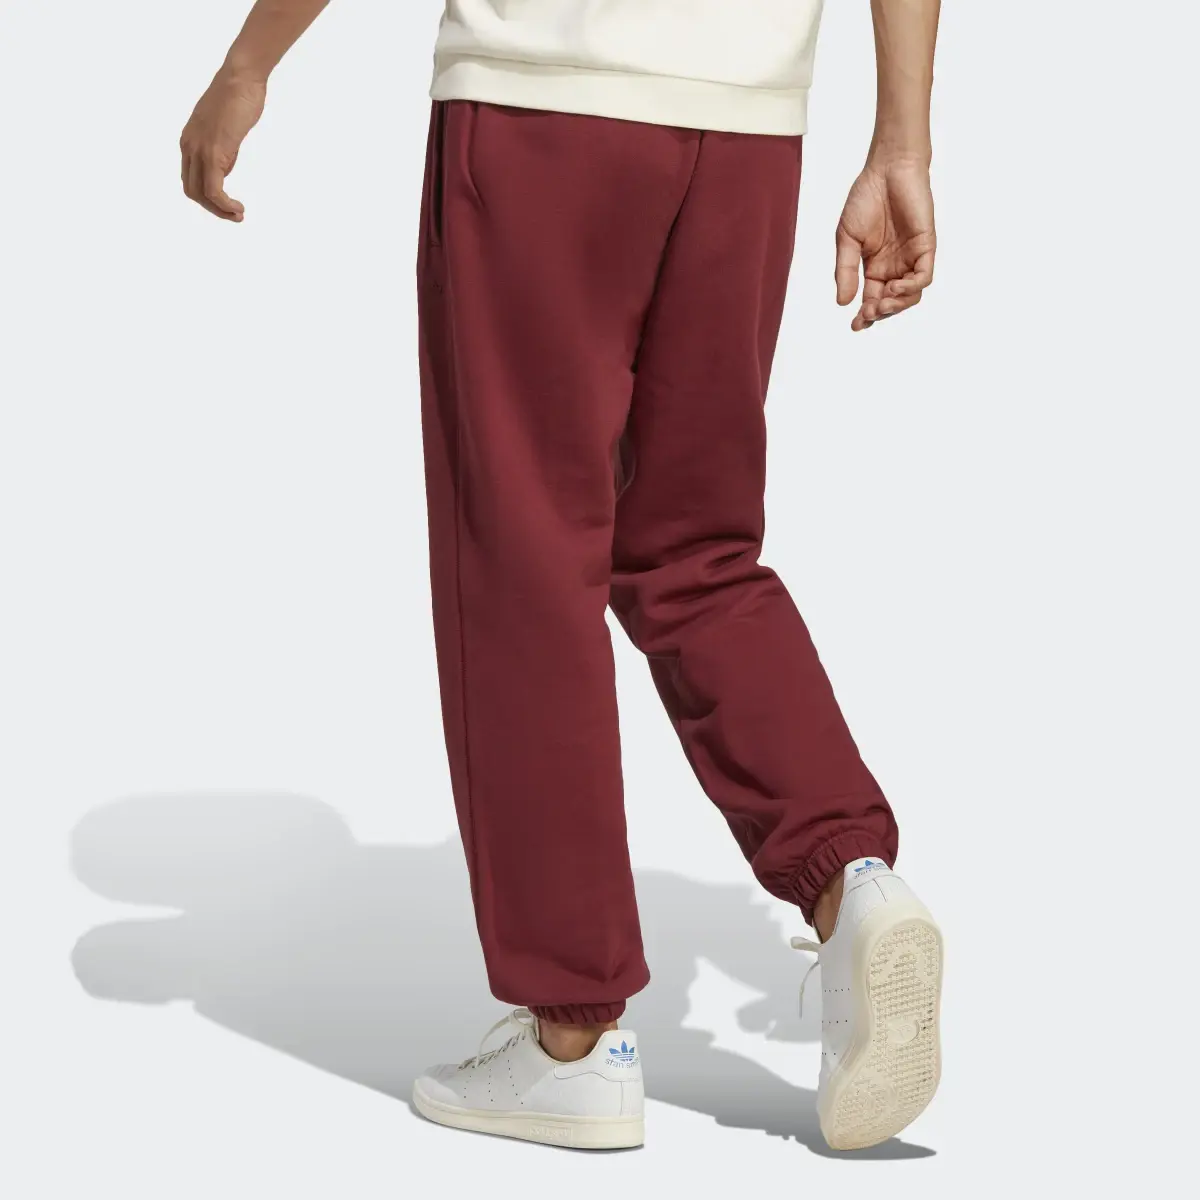 Adidas Adicolor Contempo French Terry Joggers. 2